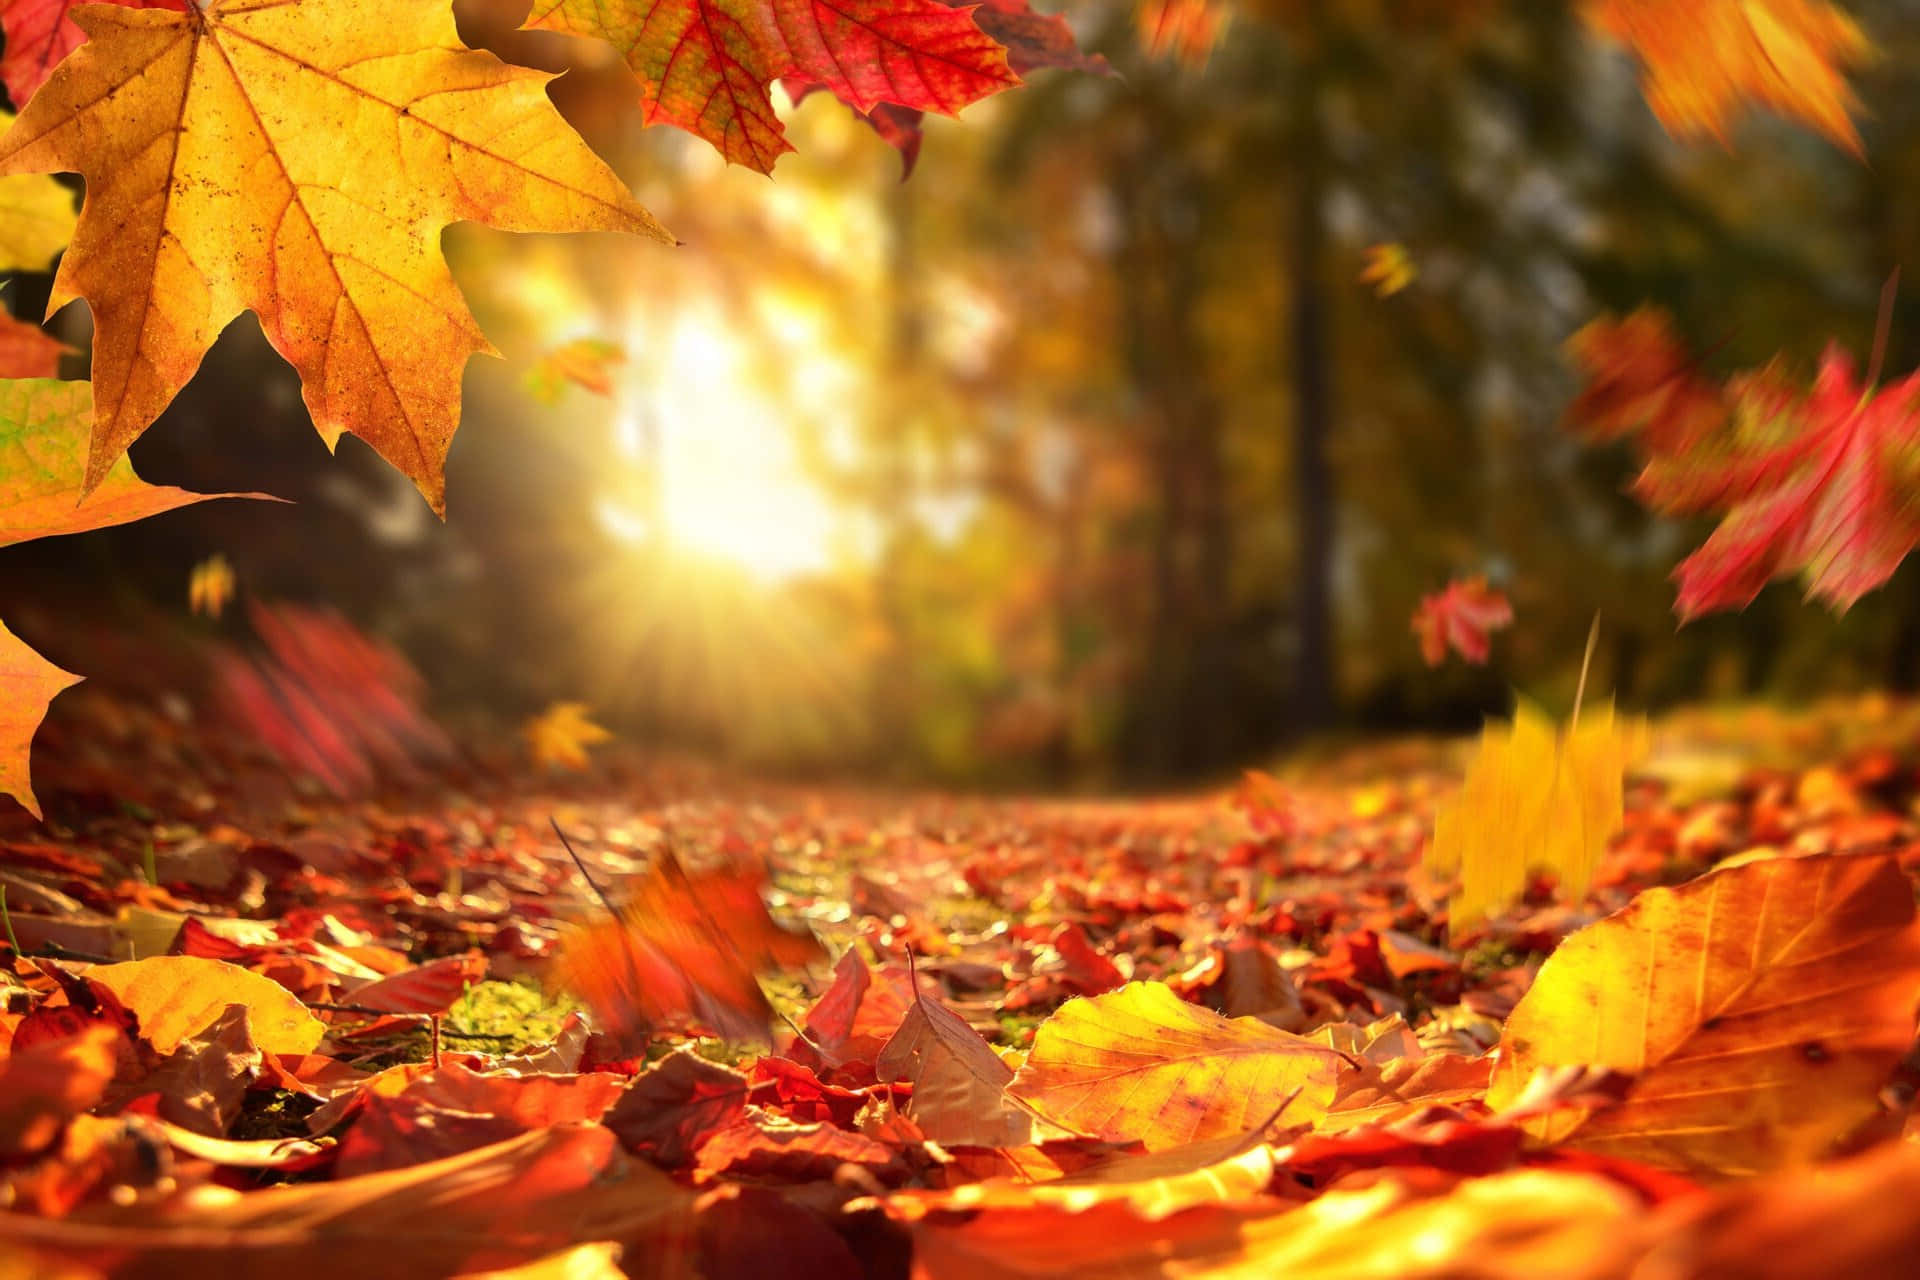 Autumn tranquility in the woods Wallpaper